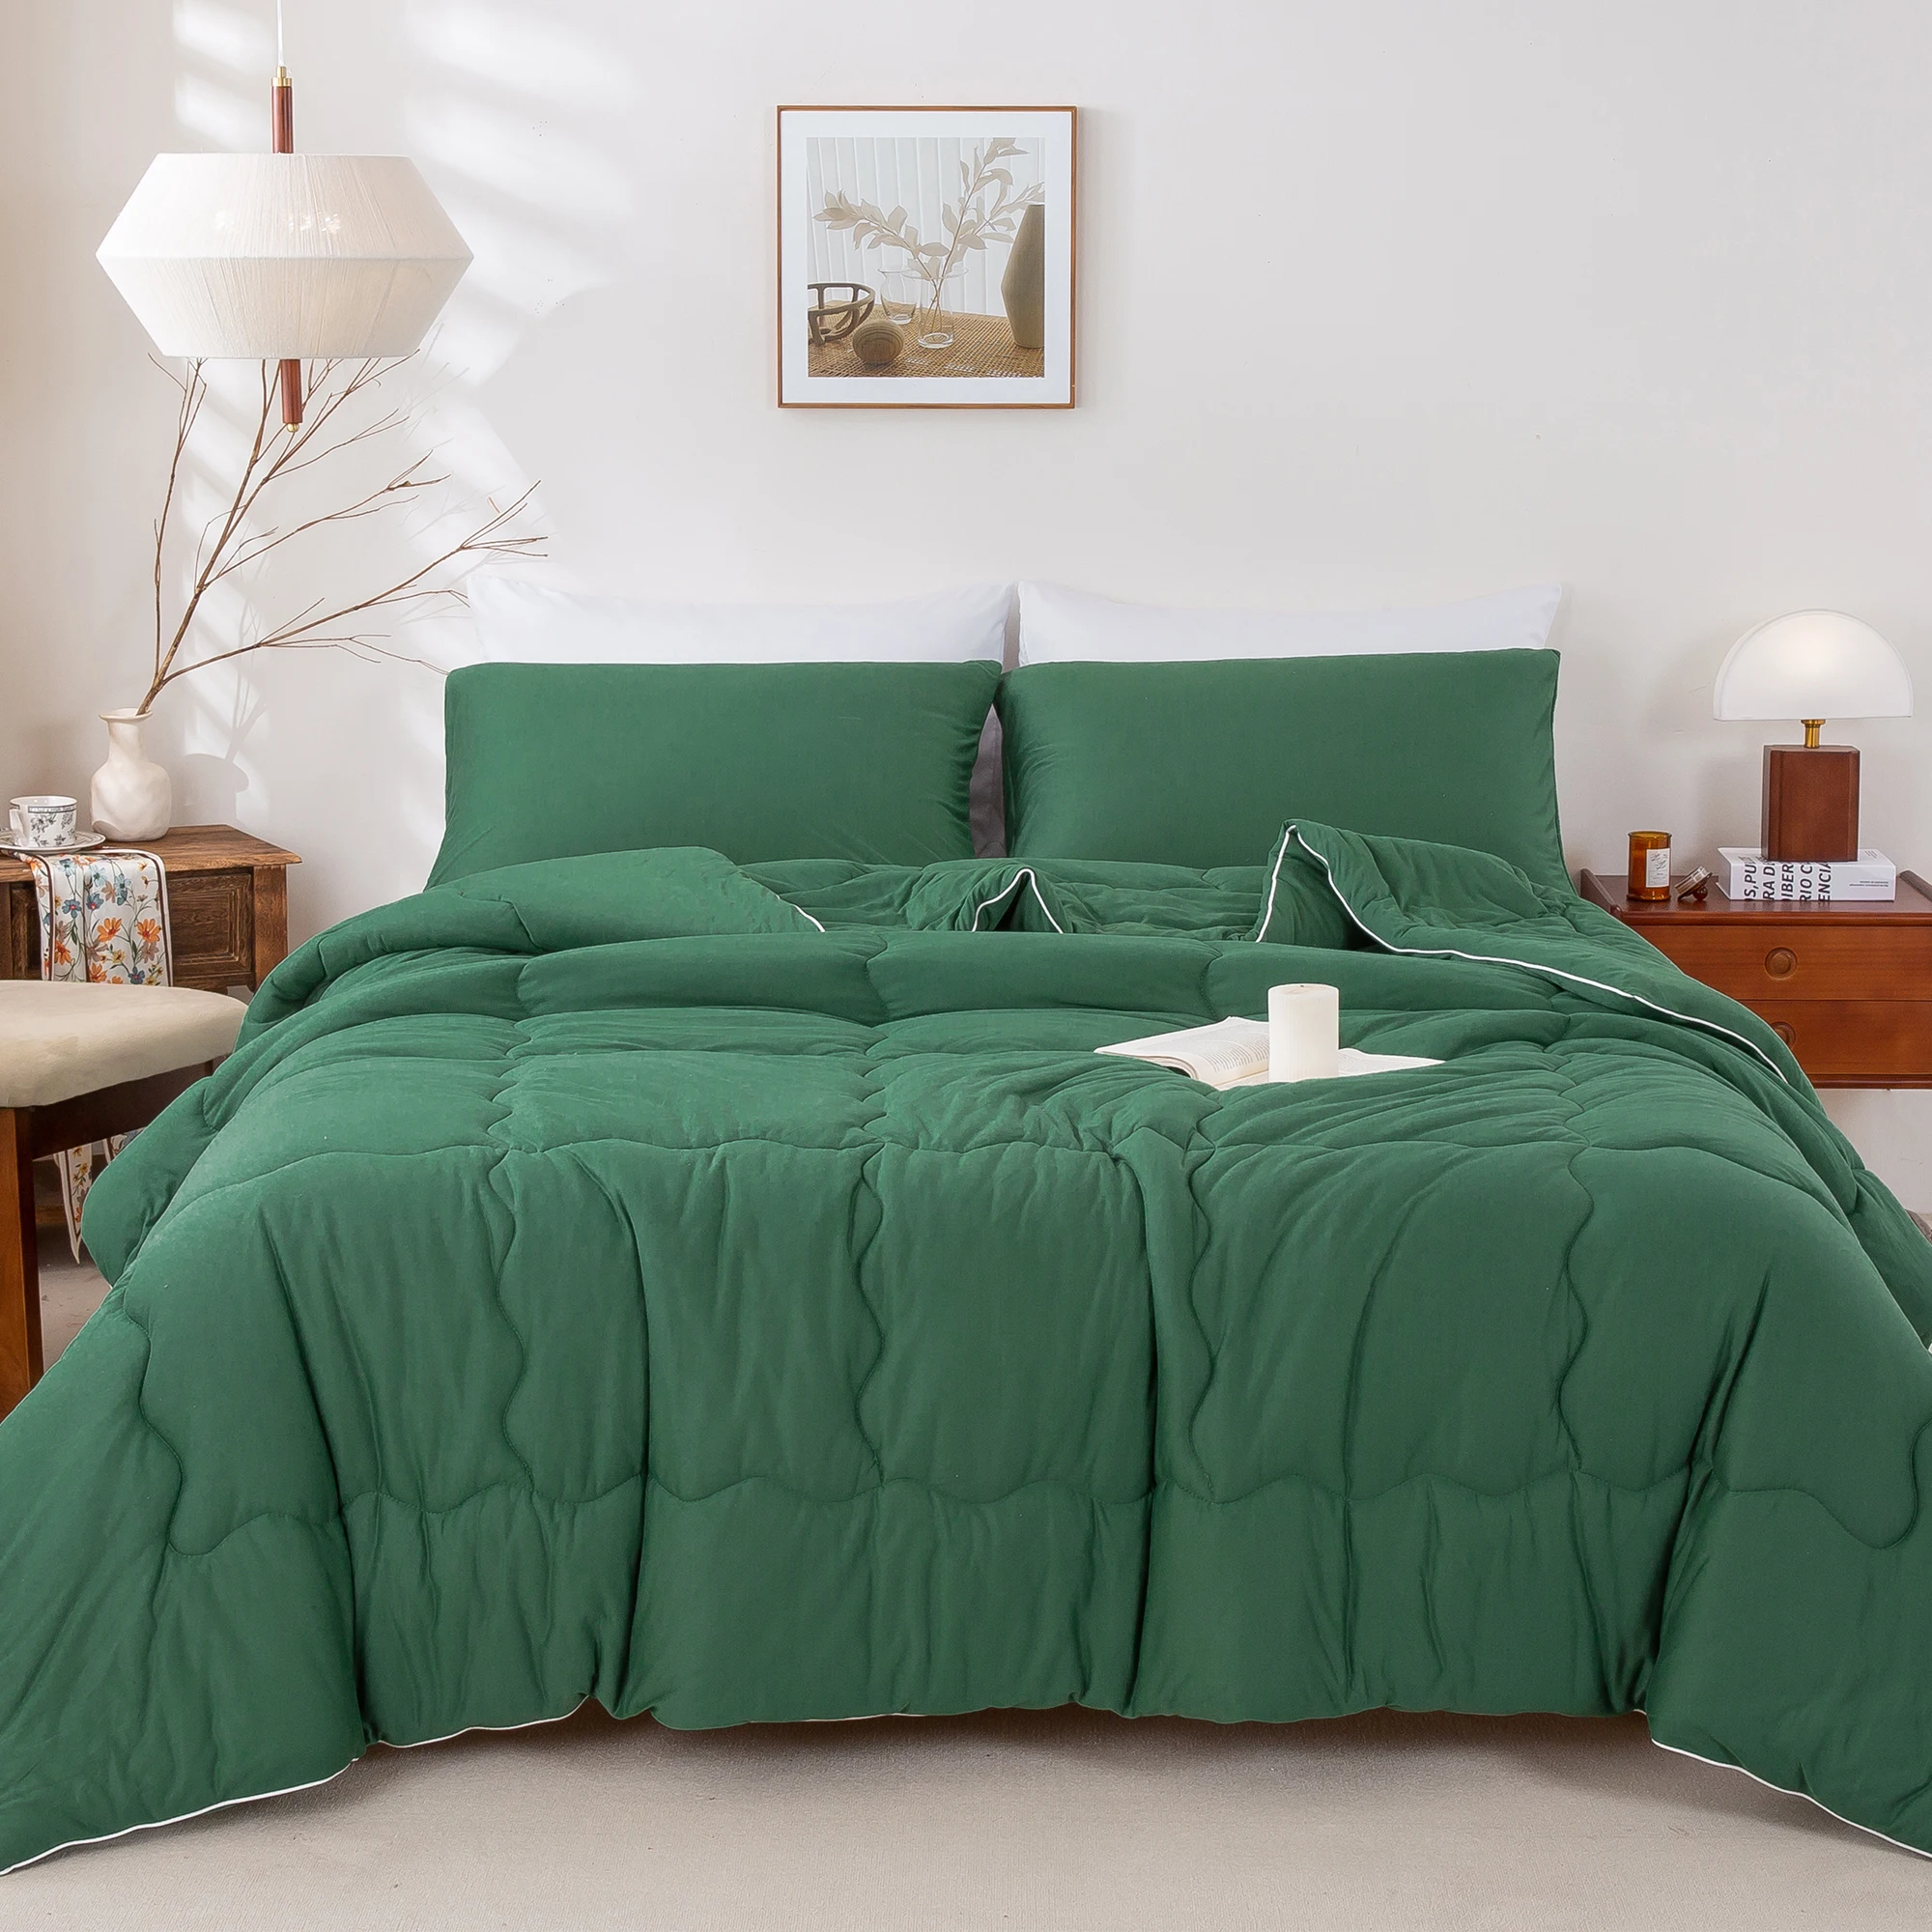 

Available in all seasons ReversibleUltraSoft Comforter Set Jersey Knit Cotton Cozy Breathable Bedding Emerald Green Twin XL Size